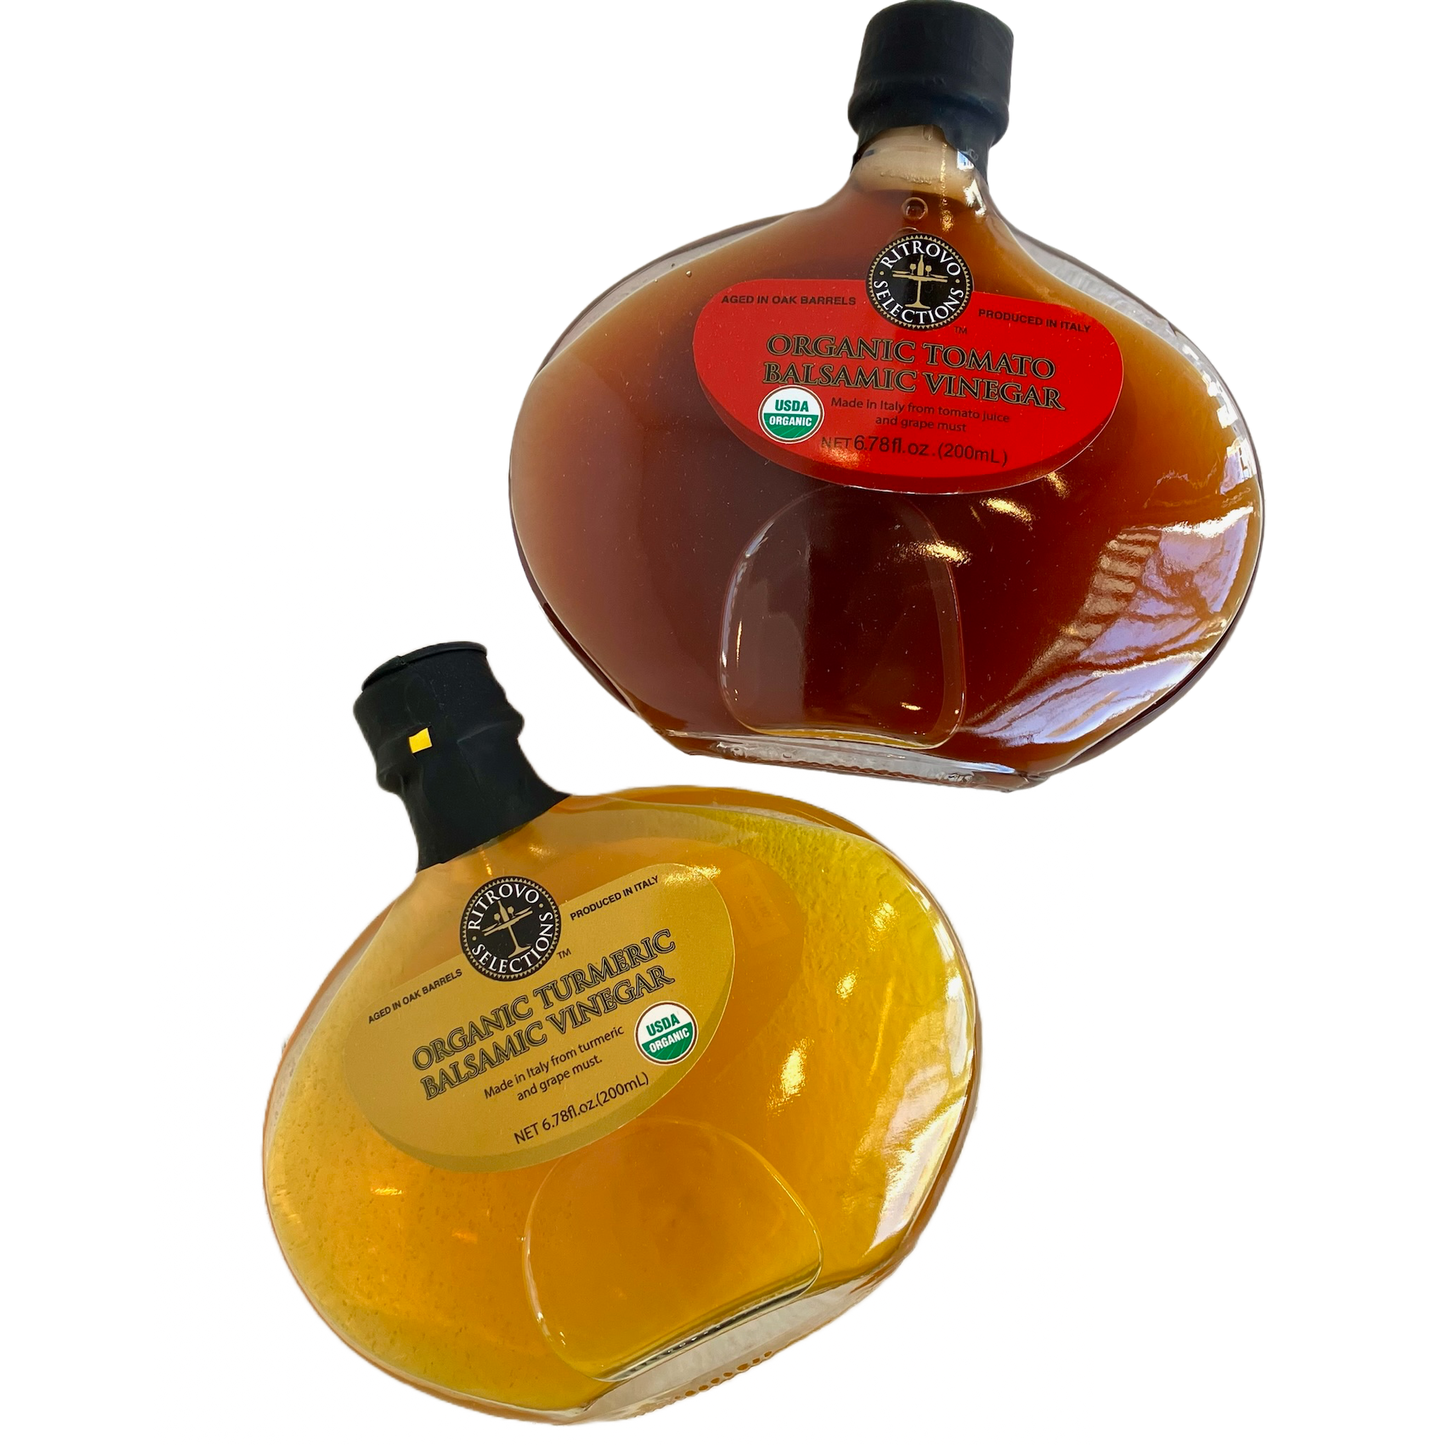 Organic Fruit Balsamic sets from VR Aceti